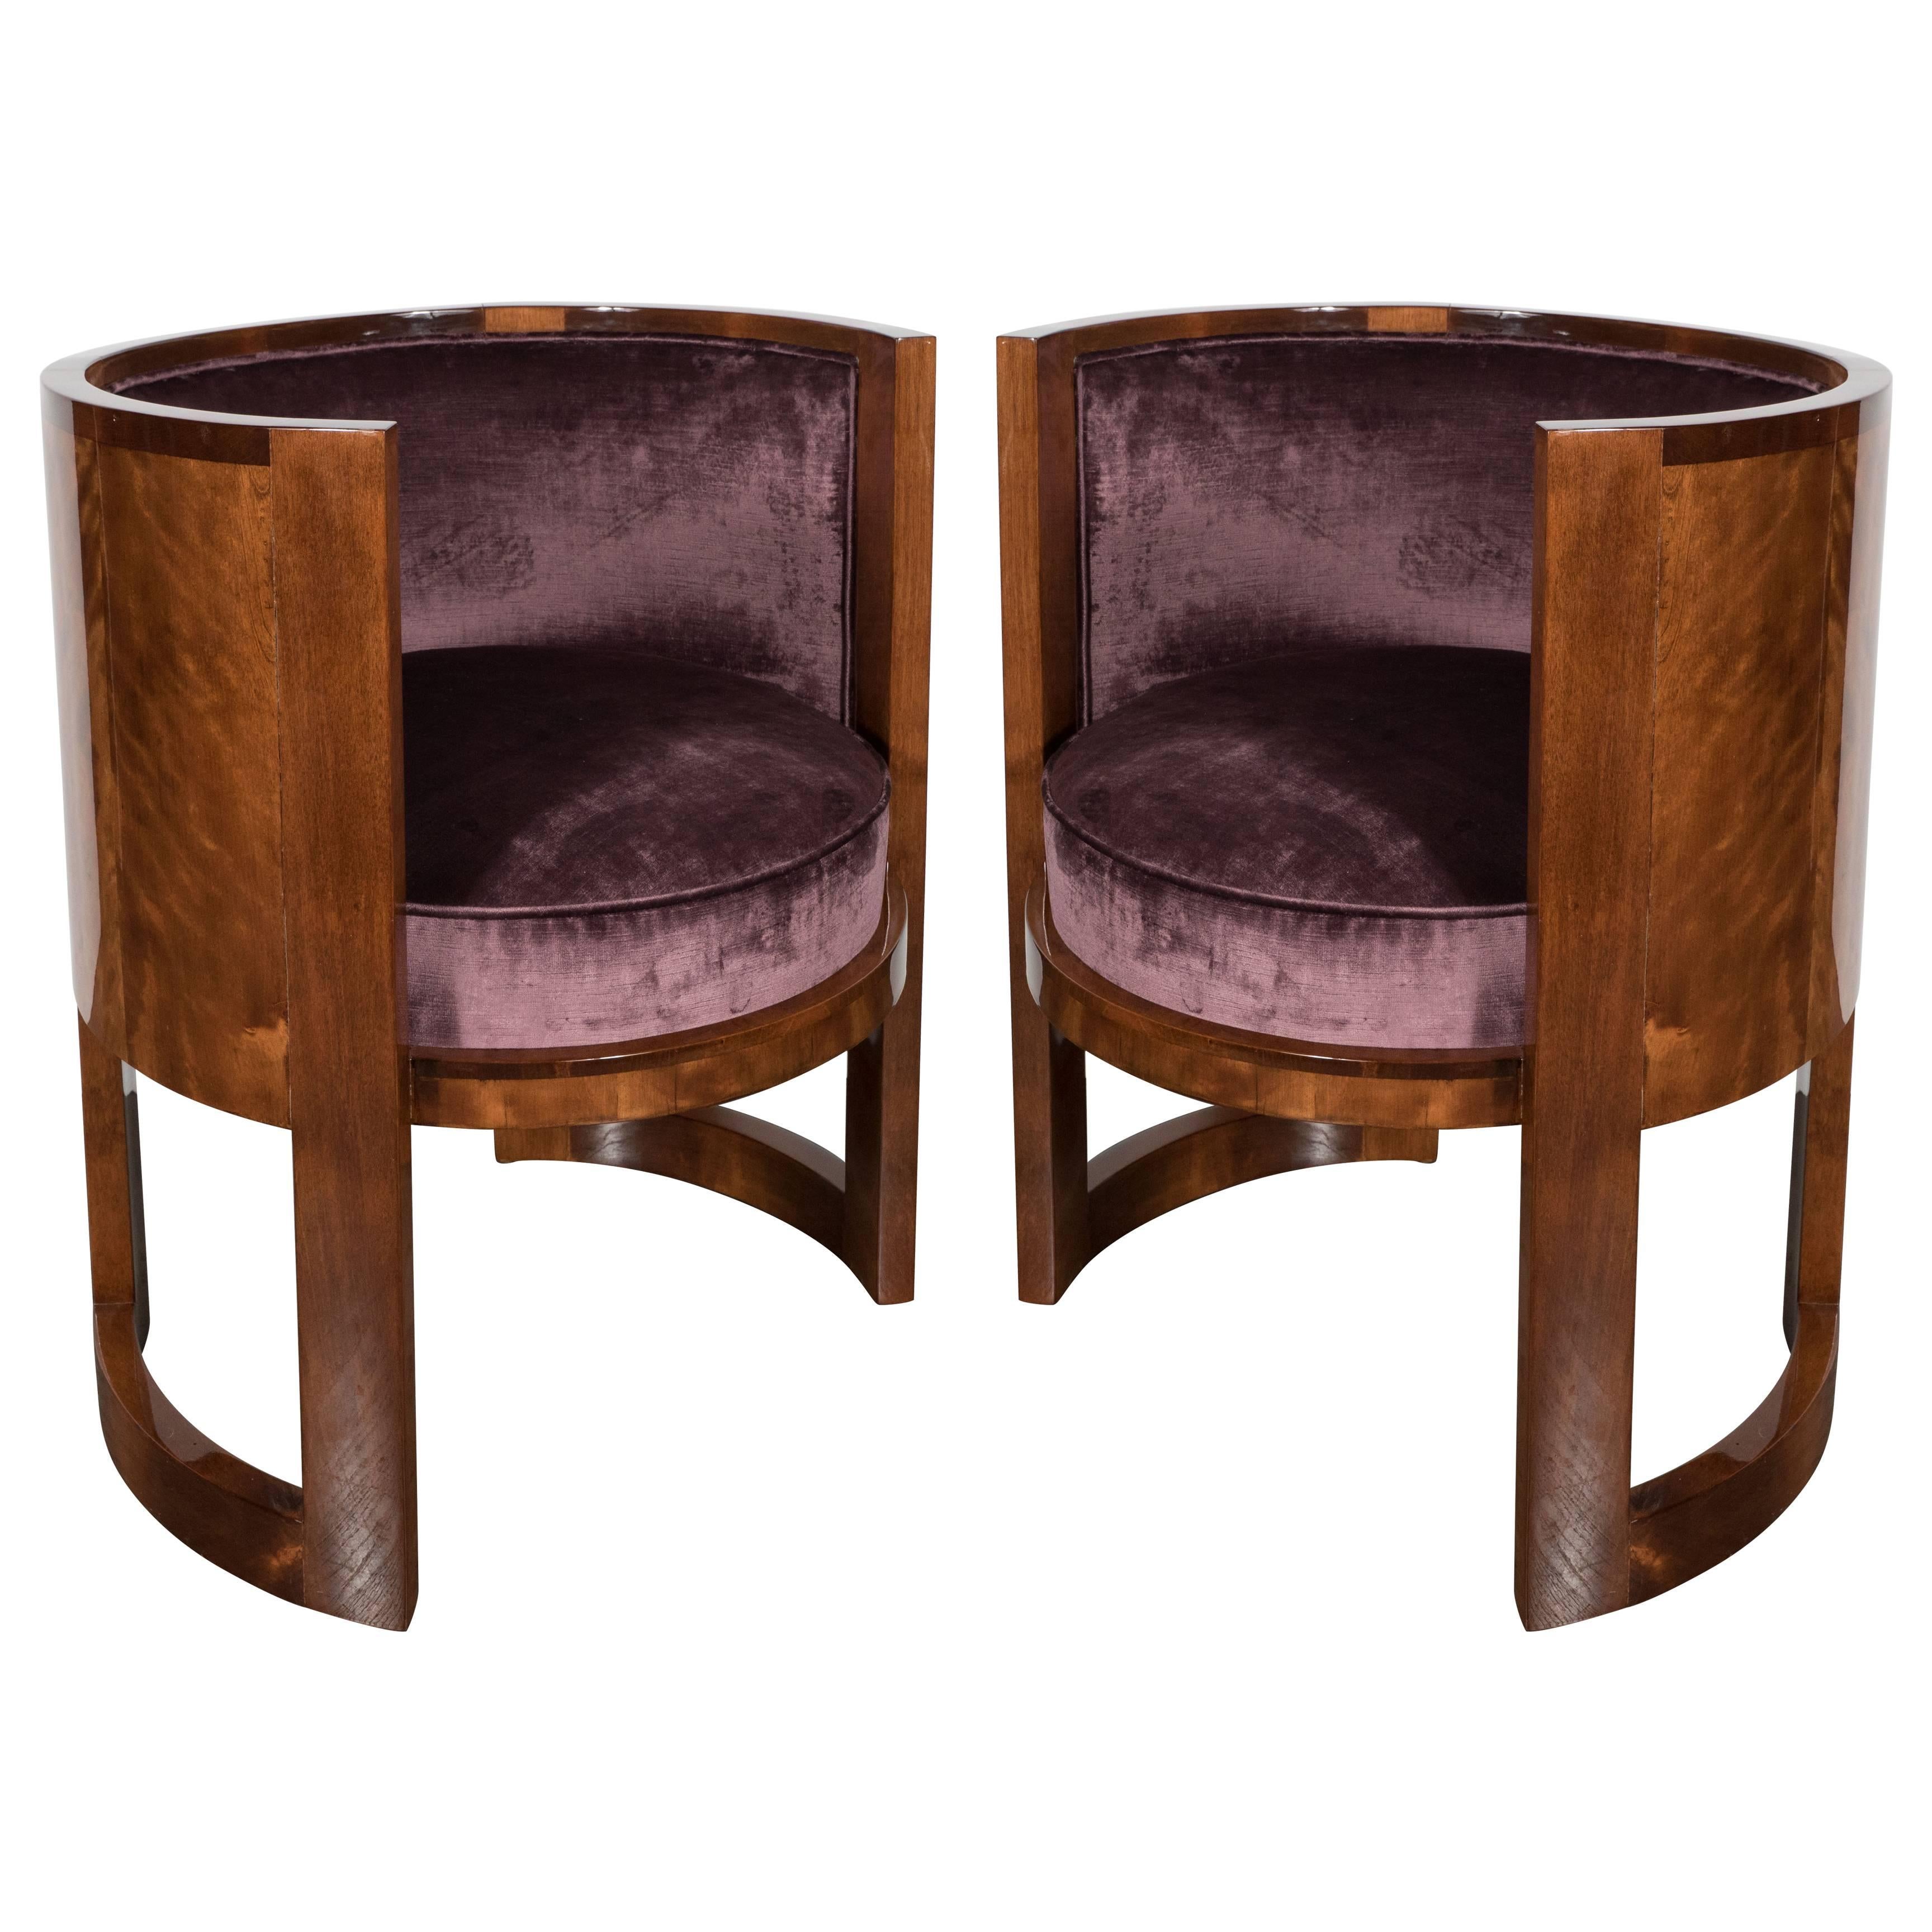 Fine Pair of Art Deco Curved-Back Salon Chairs in Smoked Amethyst Velvet